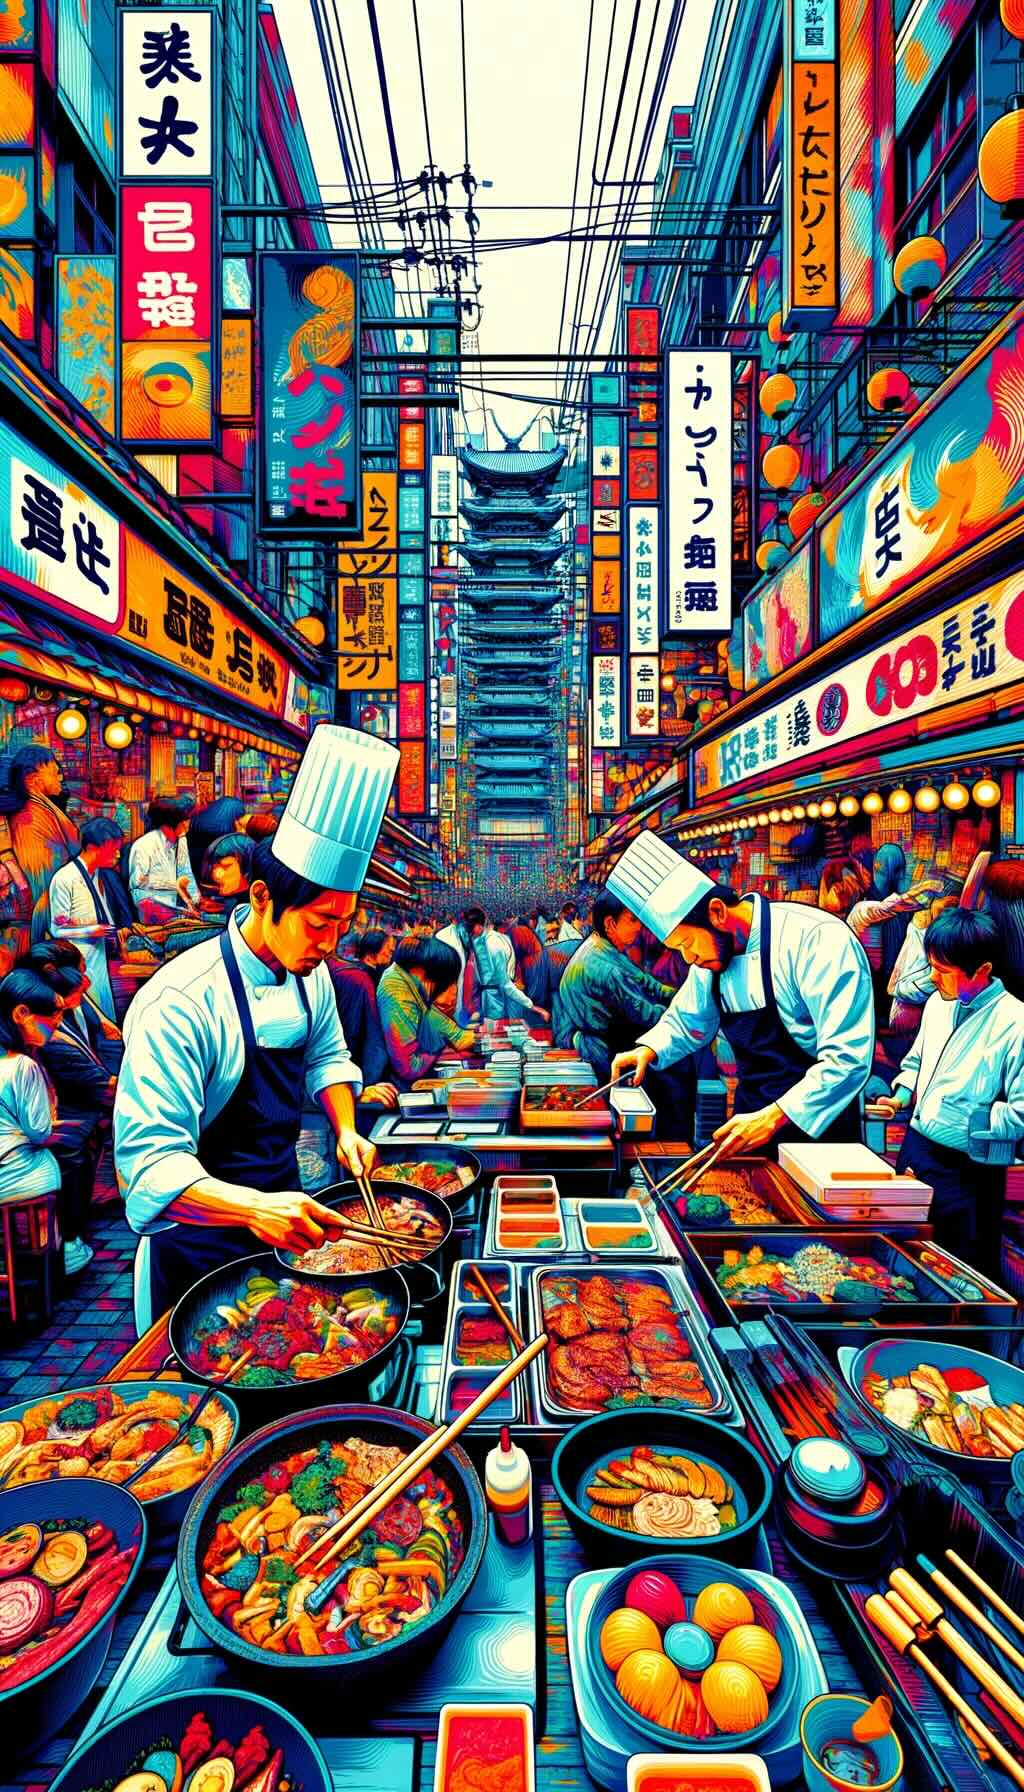 Vibrant street food scene in Osaka, Japan captures the lively essence of places like Dotonbori, Shinsekai, and Kuromon Ichiba Market, highlighting the interaction of chefs, tantalizing aromas, and the excited customers emphasizing the rich cultural and community aspects of Osaka's street food culture